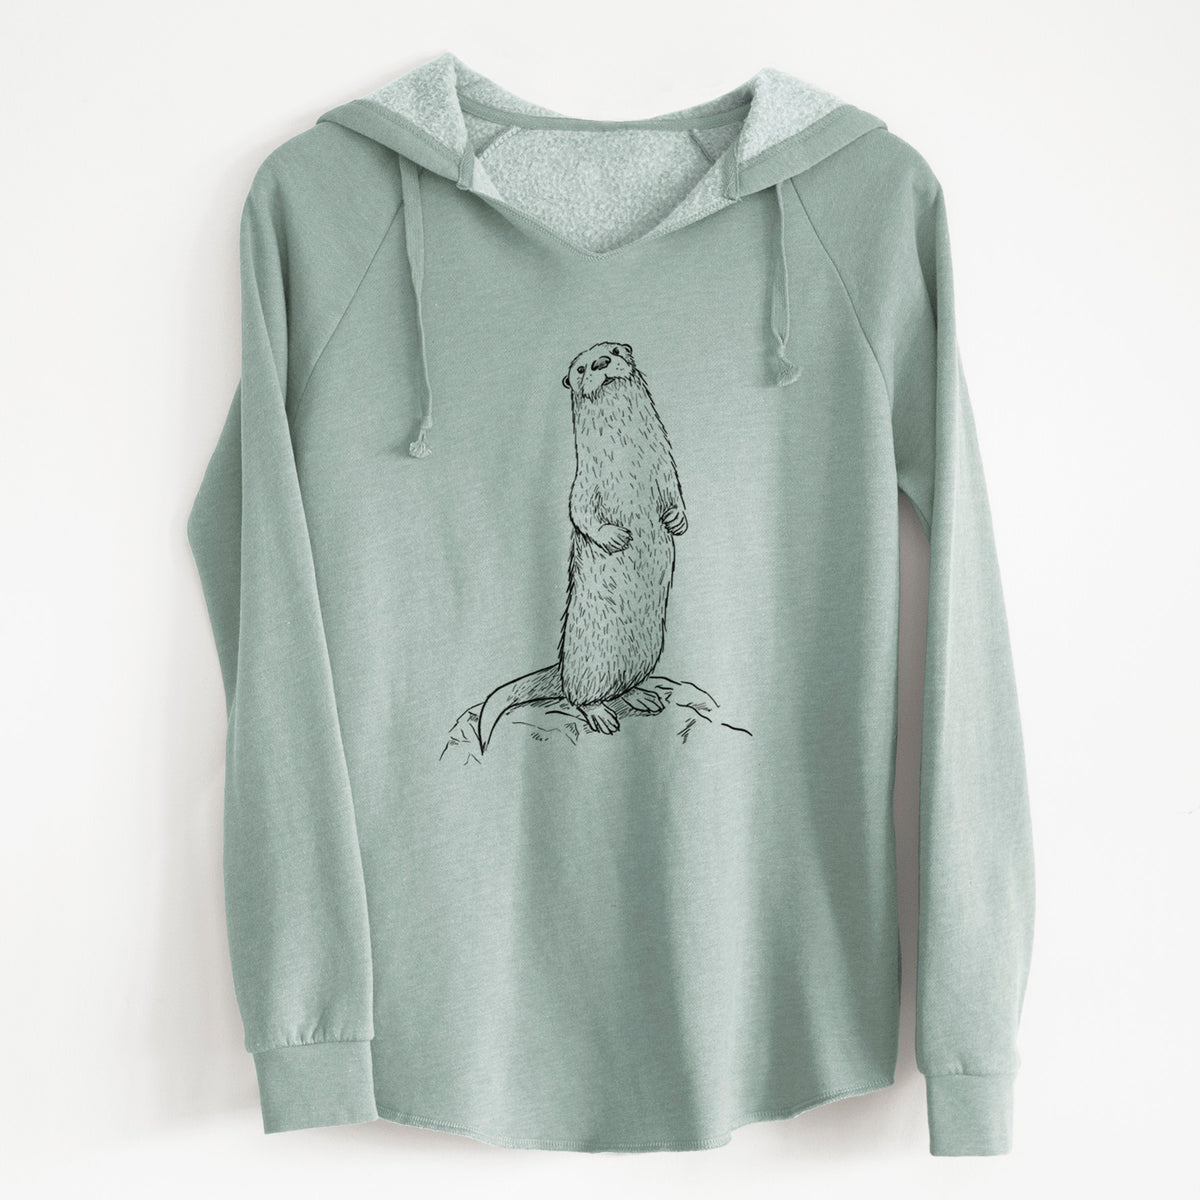 North American River Otter - Lontra canadensis - Cali Wave Hooded Sweatshirt